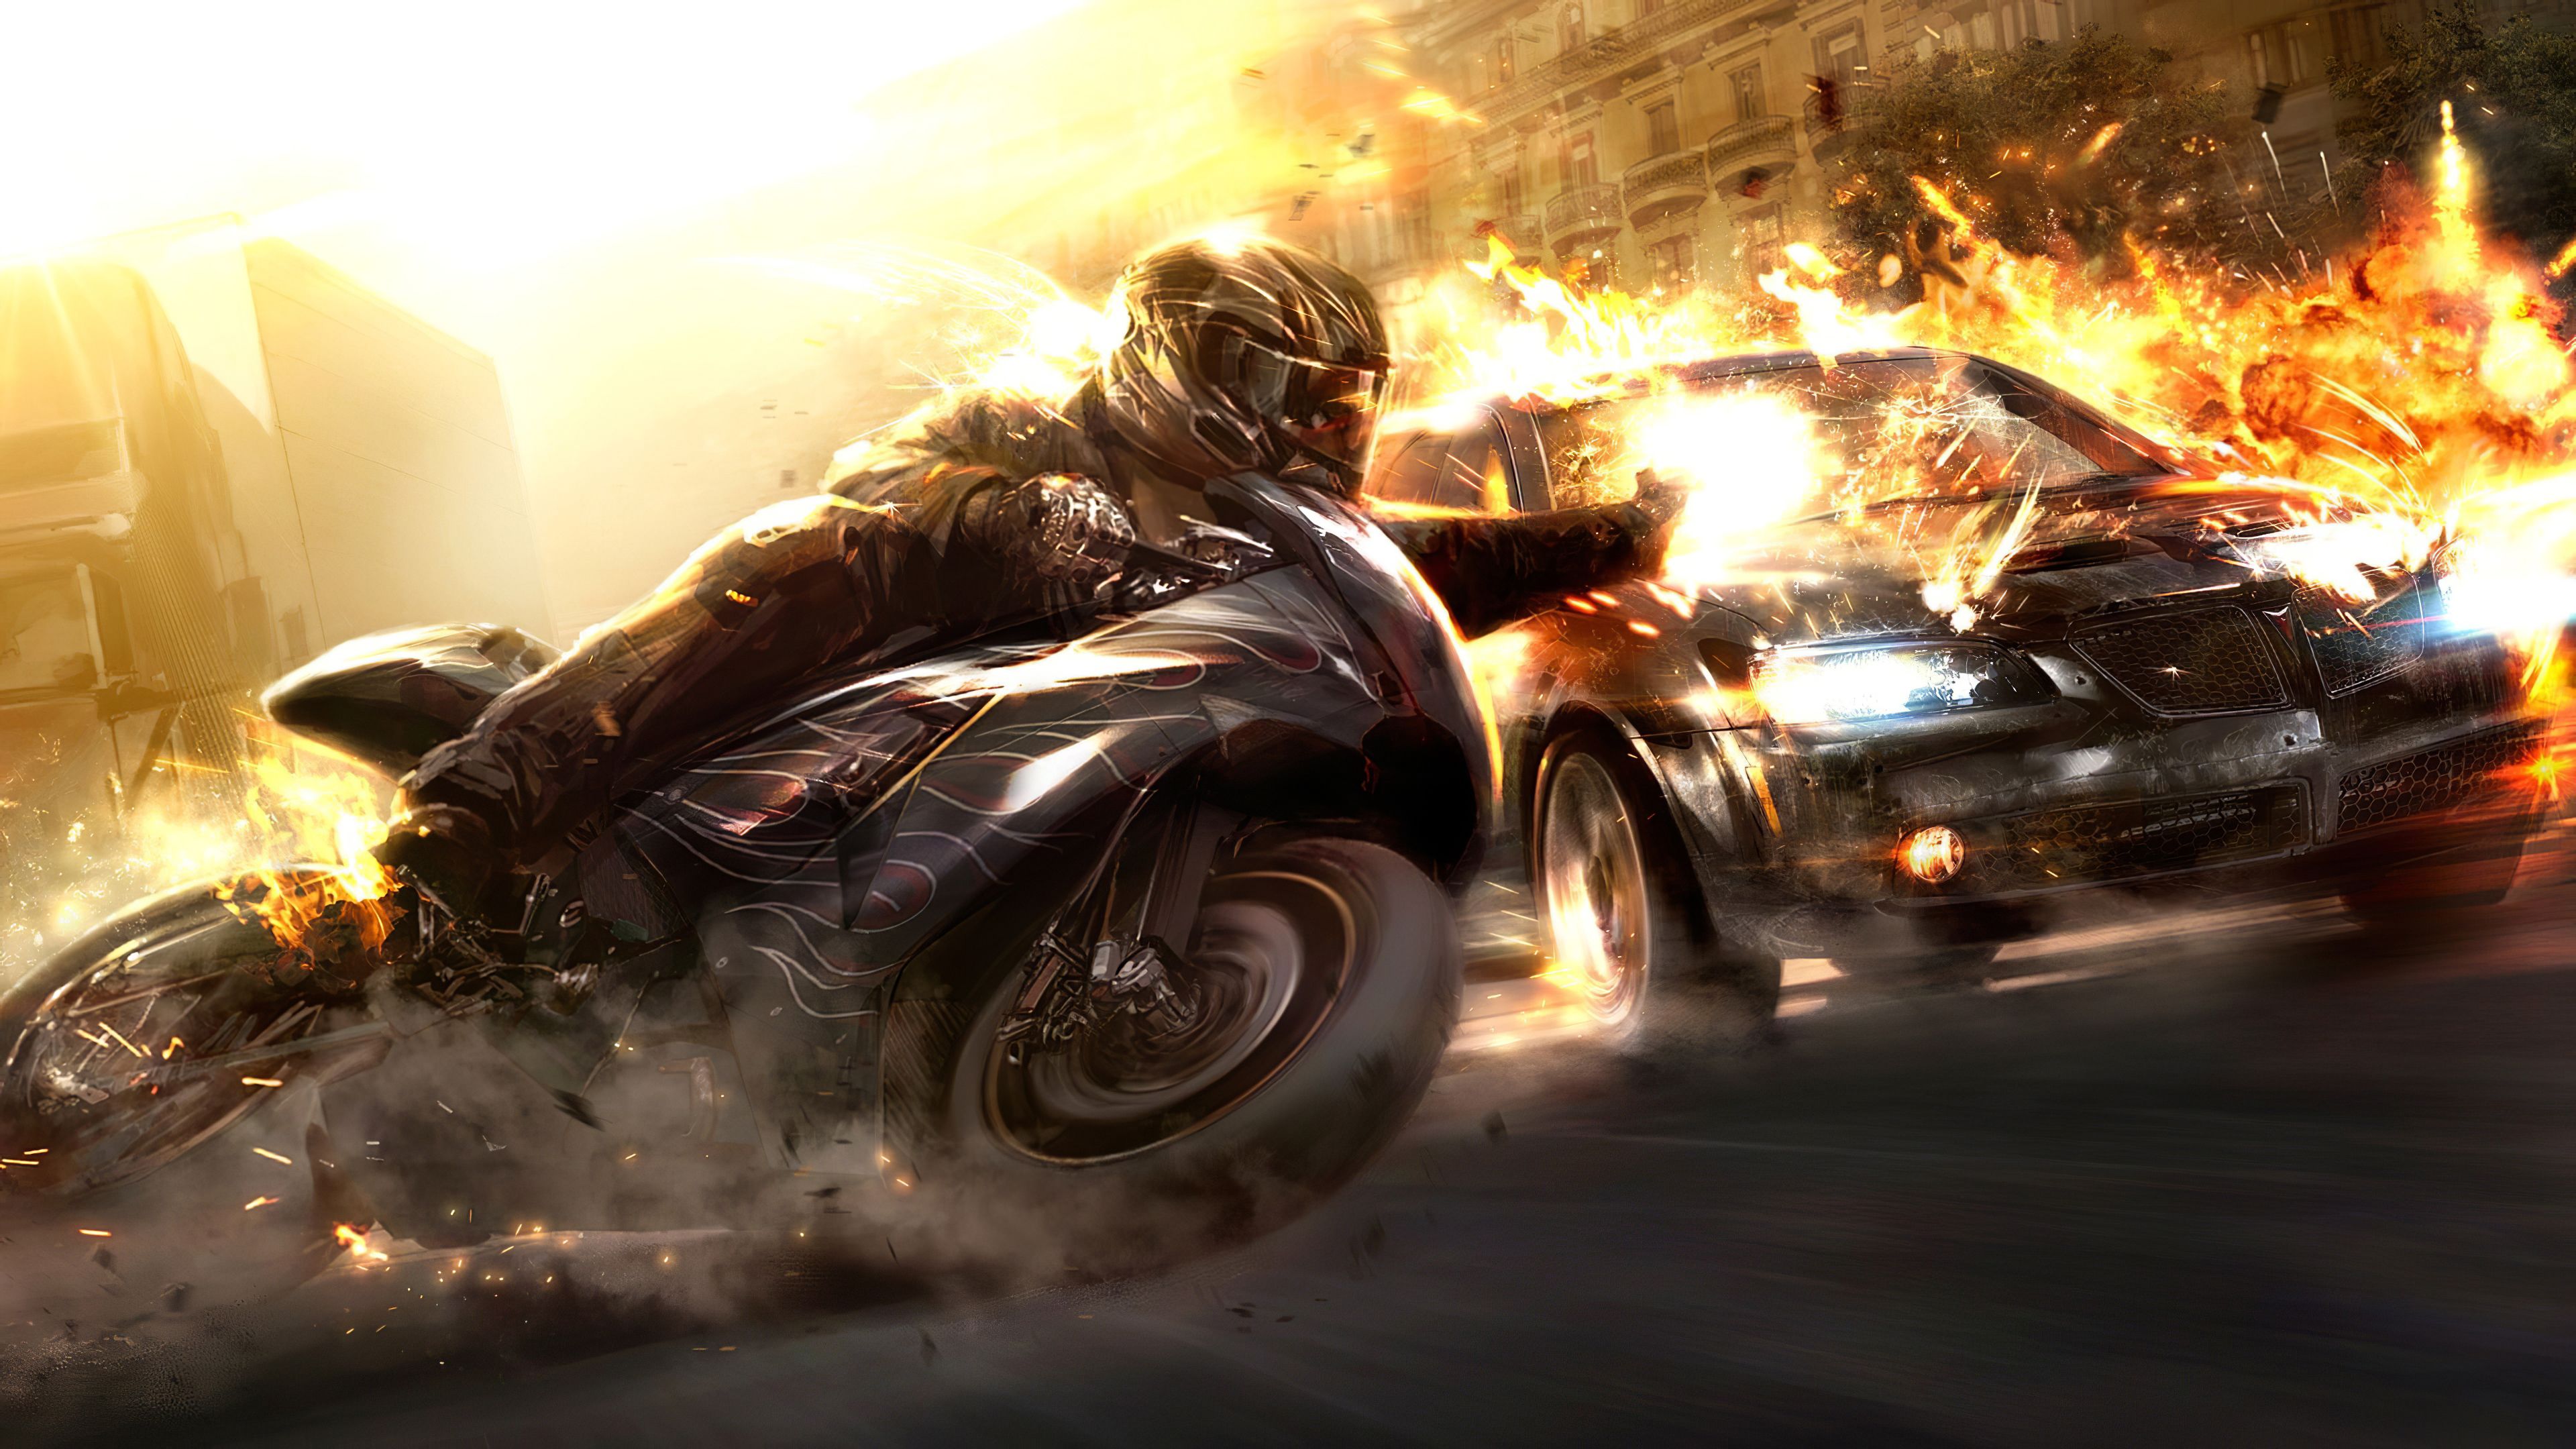 High Speed Motorbike Cop Car Chase, HD Artist, 4k Wallpaper, Image, Background, Photo and Picture